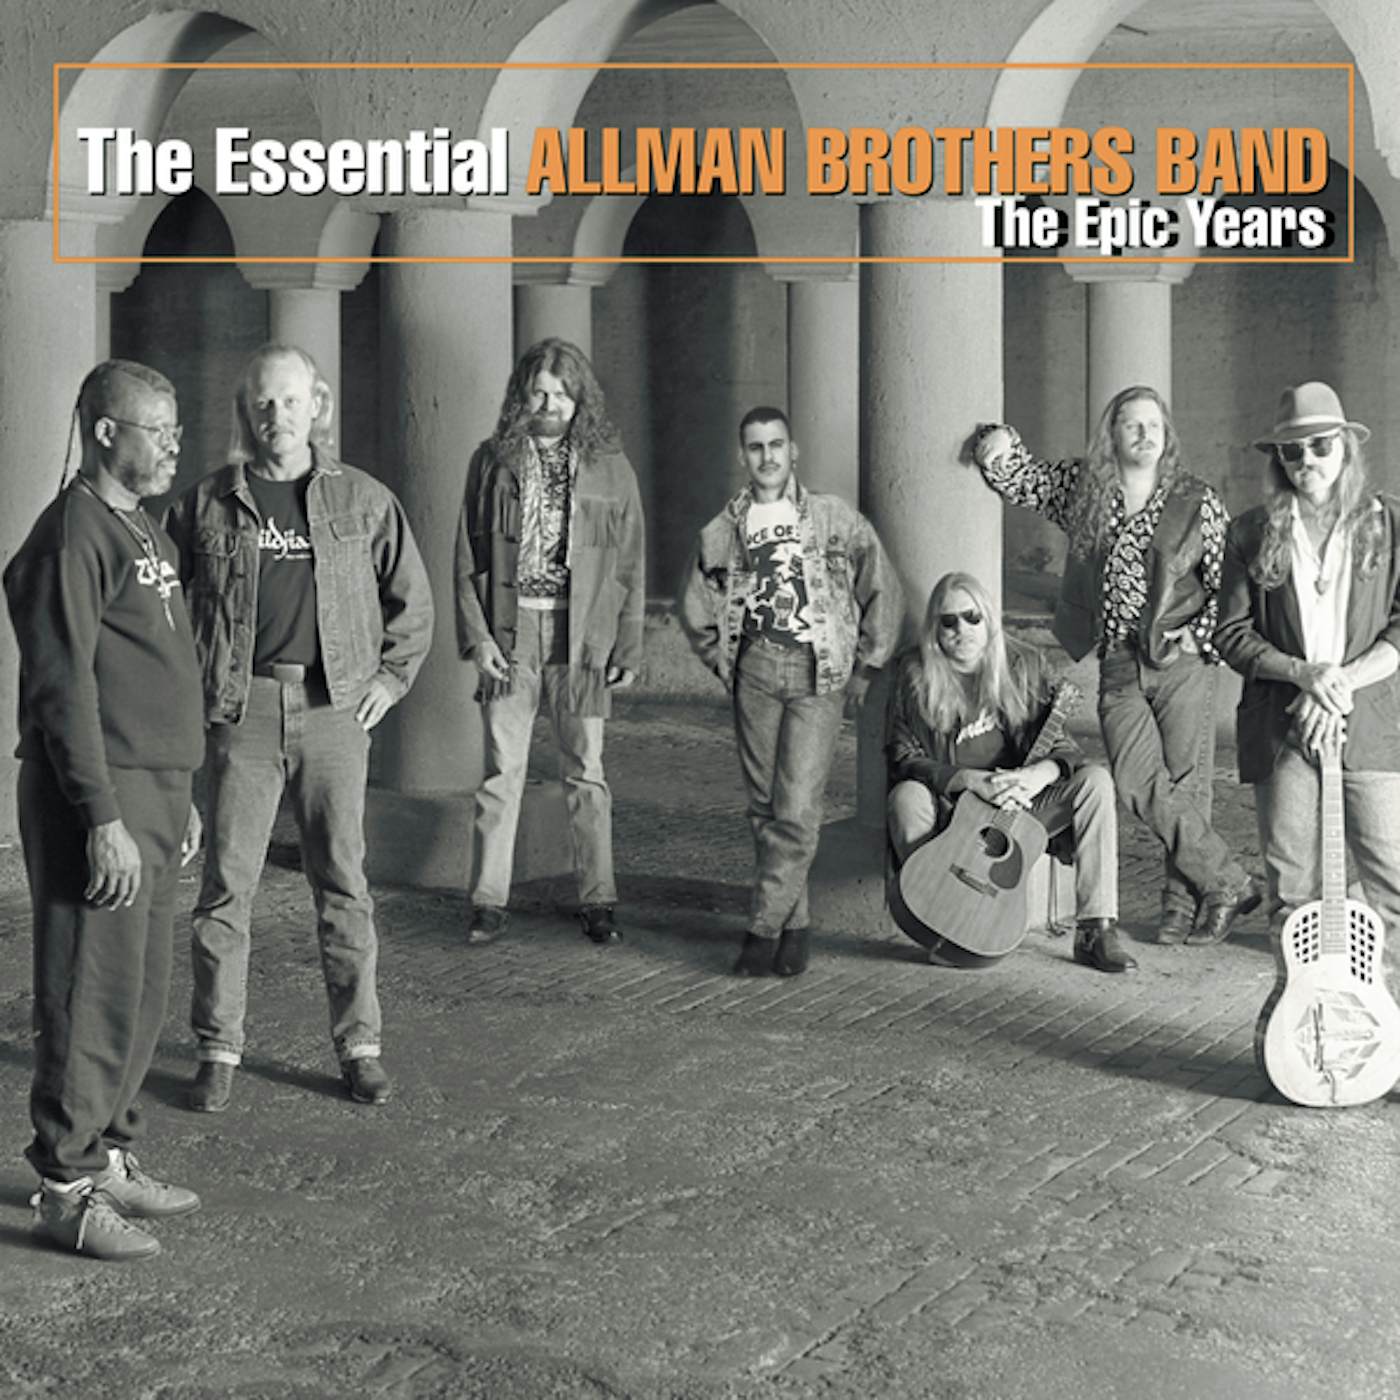 ESSENTIAL ALLMAN BROTHERS BAND - THE EPIC YEARS CD